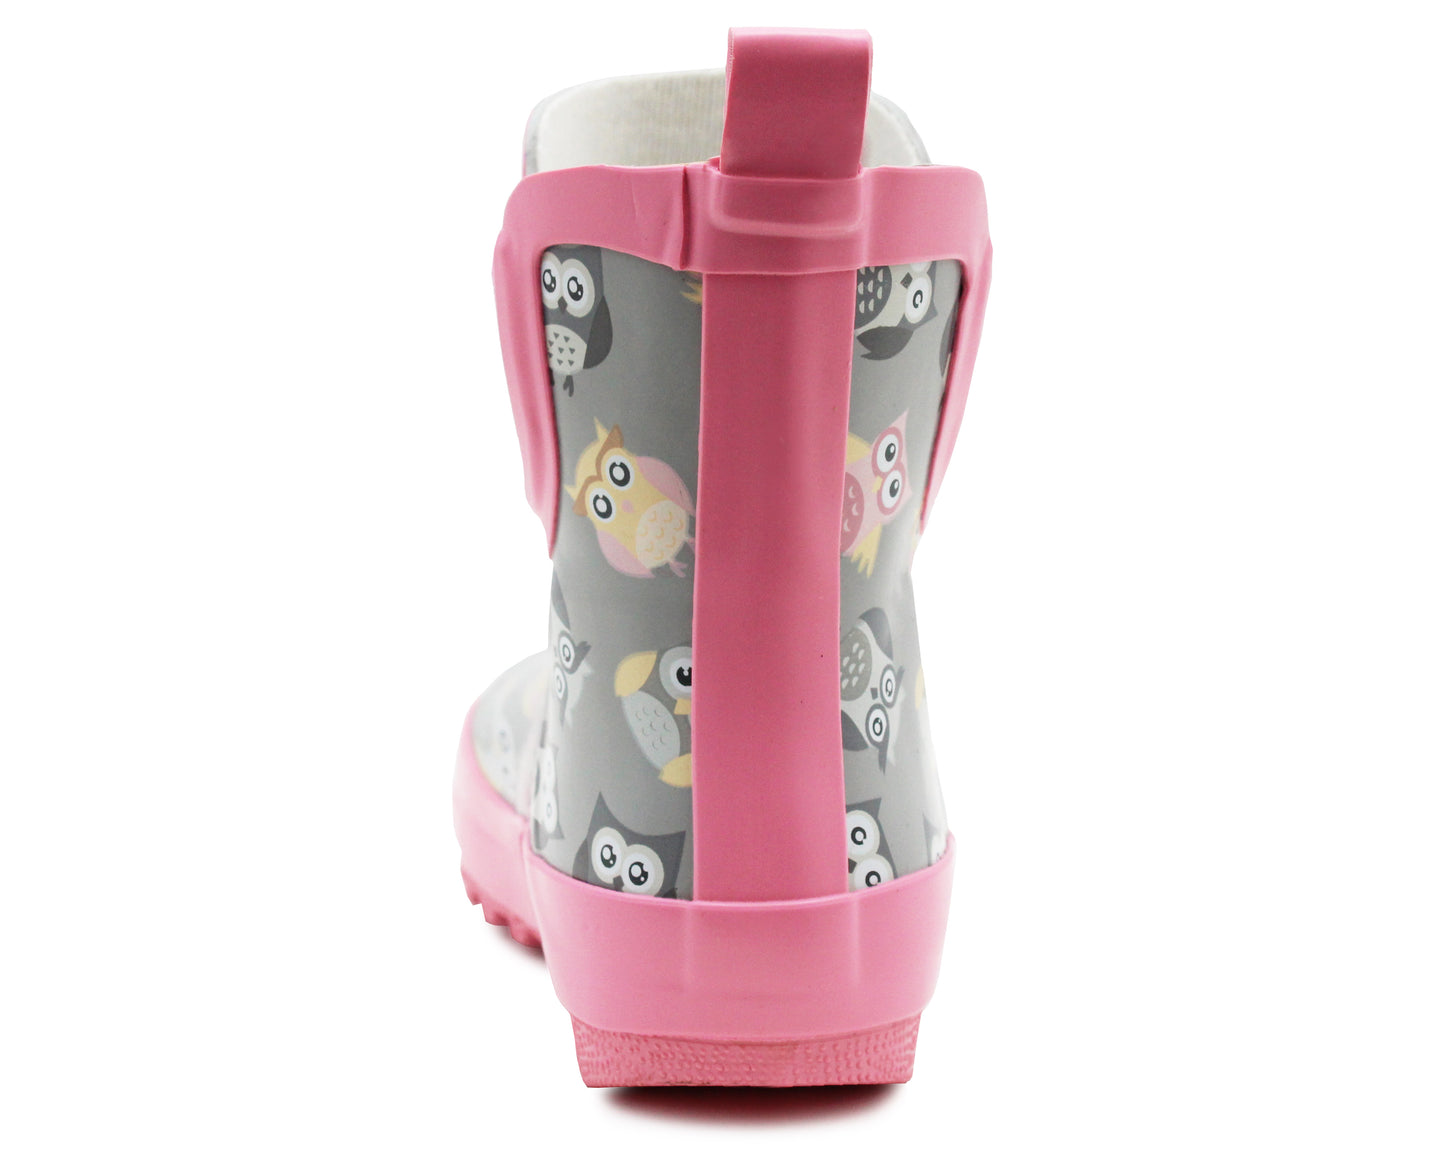 Girls Kids Wellington Boots Infant Toddlers Ankle Boot Wellies Elastic Waterproof Puddle Rain Boots